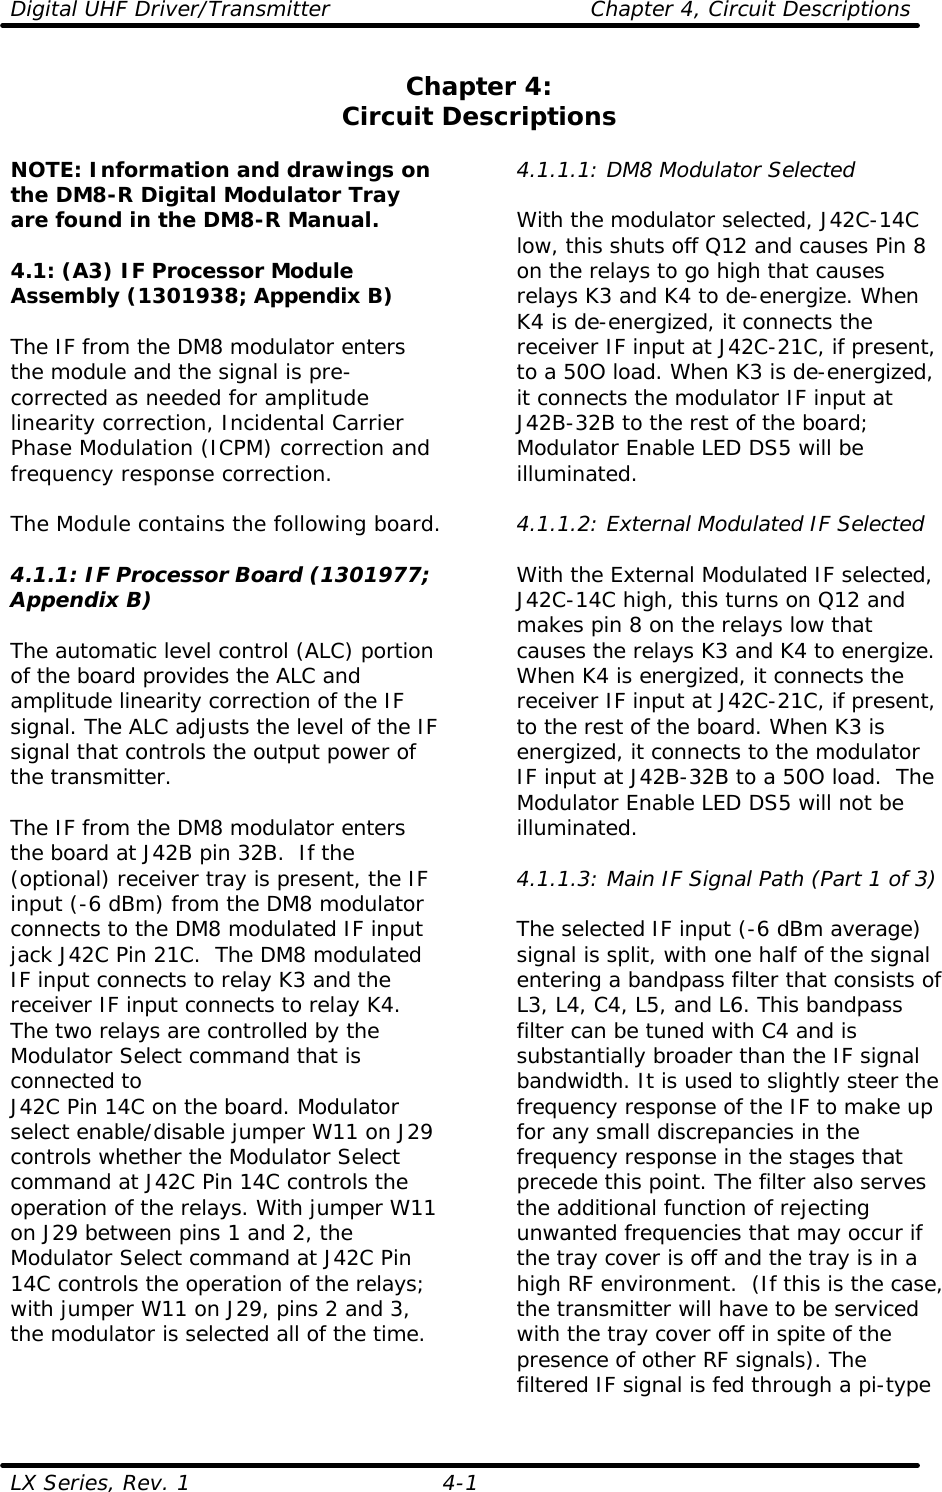 Digital UHF Driver/Transmitter  Chapter 4, Circuit Descriptions LX Series, Rev. 1 4-1 Chapter 4: Circuit Descriptions  NOTE: Information and drawings on the DM8-R Digital Modulator Tray are found in the DM8-R Manual.  4.1: (A3) IF Processor Module Assembly (1301938; Appendix B)  The IF from the DM8 modulator enters the module and the signal is pre-corrected as needed for amplitude linearity correction, Incidental Carrier Phase Modulation (ICPM) correction and frequency response correction.  The Module contains the following board.  4.1.1: IF Processor Board (1301977; Appendix B)  The automatic level control (ALC) portion of the board provides the ALC and amplitude linearity correction of the IF signal. The ALC adjusts the level of the IF signal that controls the output power of the transmitter.  The IF from the DM8 modulator enters the board at J42B pin 32B.  If the (optional) receiver tray is present, the IF input (-6 dBm) from the DM8 modulator connects to the DM8 modulated IF input jack J42C Pin 21C.  The DM8 modulated IF input connects to relay K3 and the receiver IF input connects to relay K4. The two relays are controlled by the Modulator Select command that is connected to  J42C Pin 14C on the board. Modulator select enable/disable jumper W11 on J29 controls whether the Modulator Select command at J42C Pin 14C controls the operation of the relays. With jumper W11 on J29 between pins 1 and 2, the Modulator Select command at J42C Pin 14C controls the operation of the relays; with jumper W11 on J29, pins 2 and 3, the modulator is selected all of the time.    4.1.1.1: DM8 Modulator Selected  With the modulator selected, J42C-14C low, this shuts off Q12 and causes Pin 8 on the relays to go high that causes relays K3 and K4 to de-energize. When K4 is de-energized, it connects the receiver IF input at J42C-21C, if present, to a 50O load. When K3 is de-energized, it connects the modulator IF input at J42B-32B to the rest of the board; Modulator Enable LED DS5 will be illuminated.  4.1.1.2: External Modulated IF Selected  With the External Modulated IF selected, J42C-14C high, this turns on Q12 and makes pin 8 on the relays low that causes the relays K3 and K4 to energize. When K4 is energized, it connects the receiver IF input at J42C-21C, if present, to the rest of the board. When K3 is energized, it connects to the modulator IF input at J42B-32B to a 50O load.  The Modulator Enable LED DS5 will not be illuminated.  4.1.1.3: Main IF Signal Path (Part 1 of 3)  The selected IF input (-6 dBm average) signal is split, with one half of the signal entering a bandpass filter that consists of L3, L4, C4, L5, and L6. This bandpass filter can be tuned with C4 and is substantially broader than the IF signal bandwidth. It is used to slightly steer the frequency response of the IF to make up for any small discrepancies in the frequency response in the stages that precede this point. The filter also serves the additional function of rejecting unwanted frequencies that may occur if the tray cover is off and the tray is in a high RF environment.  (If this is the case, the transmitter will have to be serviced with the tray cover off in spite of the presence of other RF signals). The filtered IF signal is fed through a pi-type 